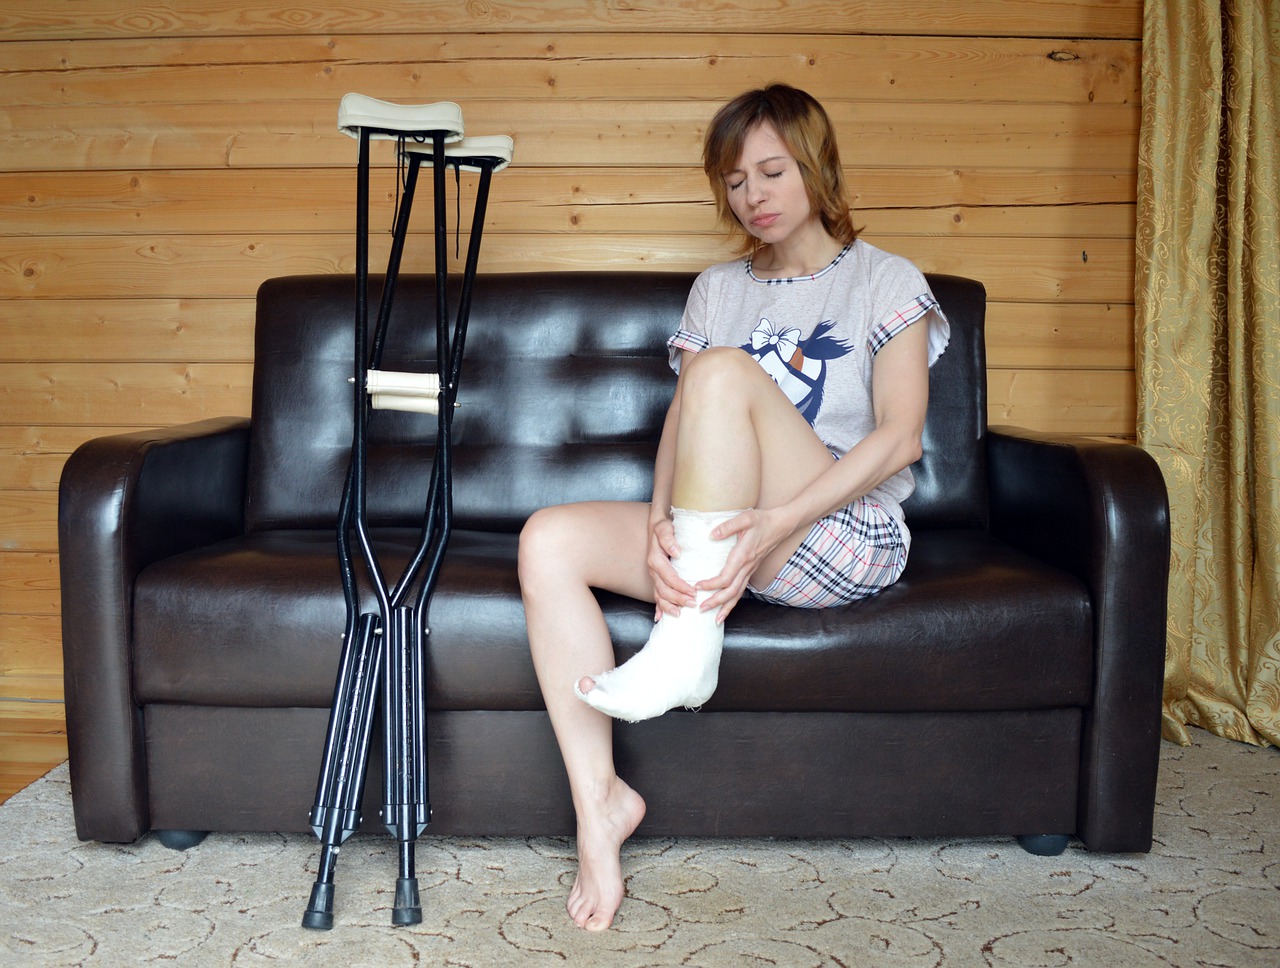 A girl with an injured ankle sitting on a couch